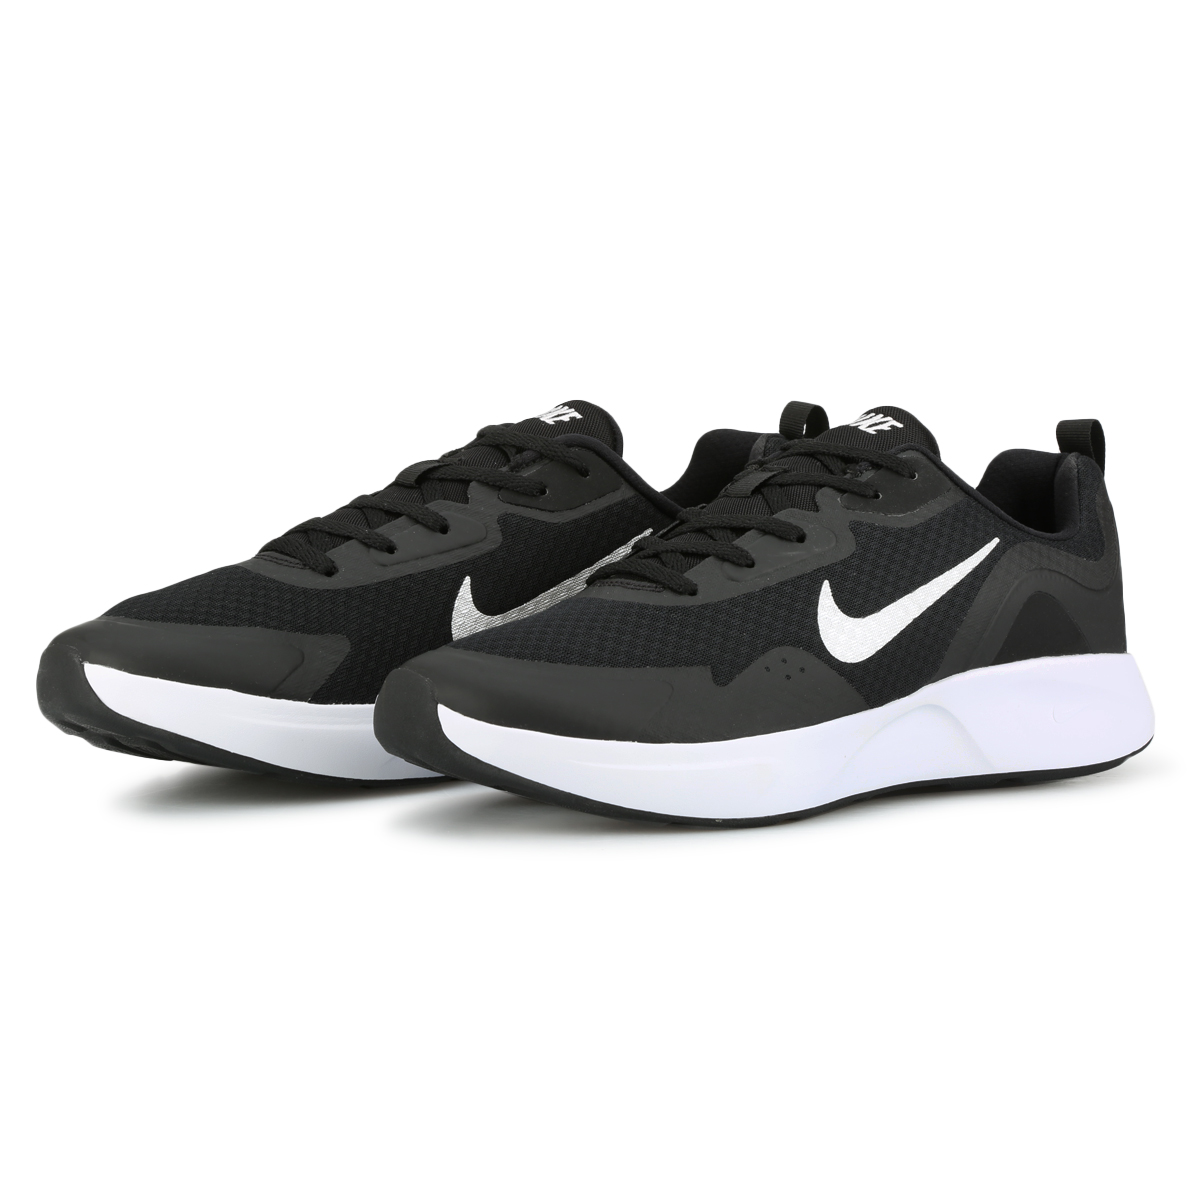 Zapatillas Nike Wearallday,  image number null